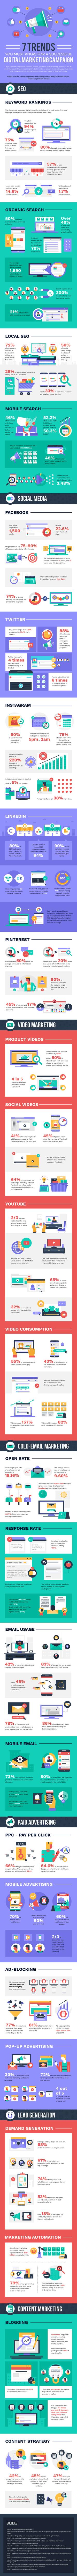 7 Trends For A Successful Digital Marketing Campaign - Infographic 1